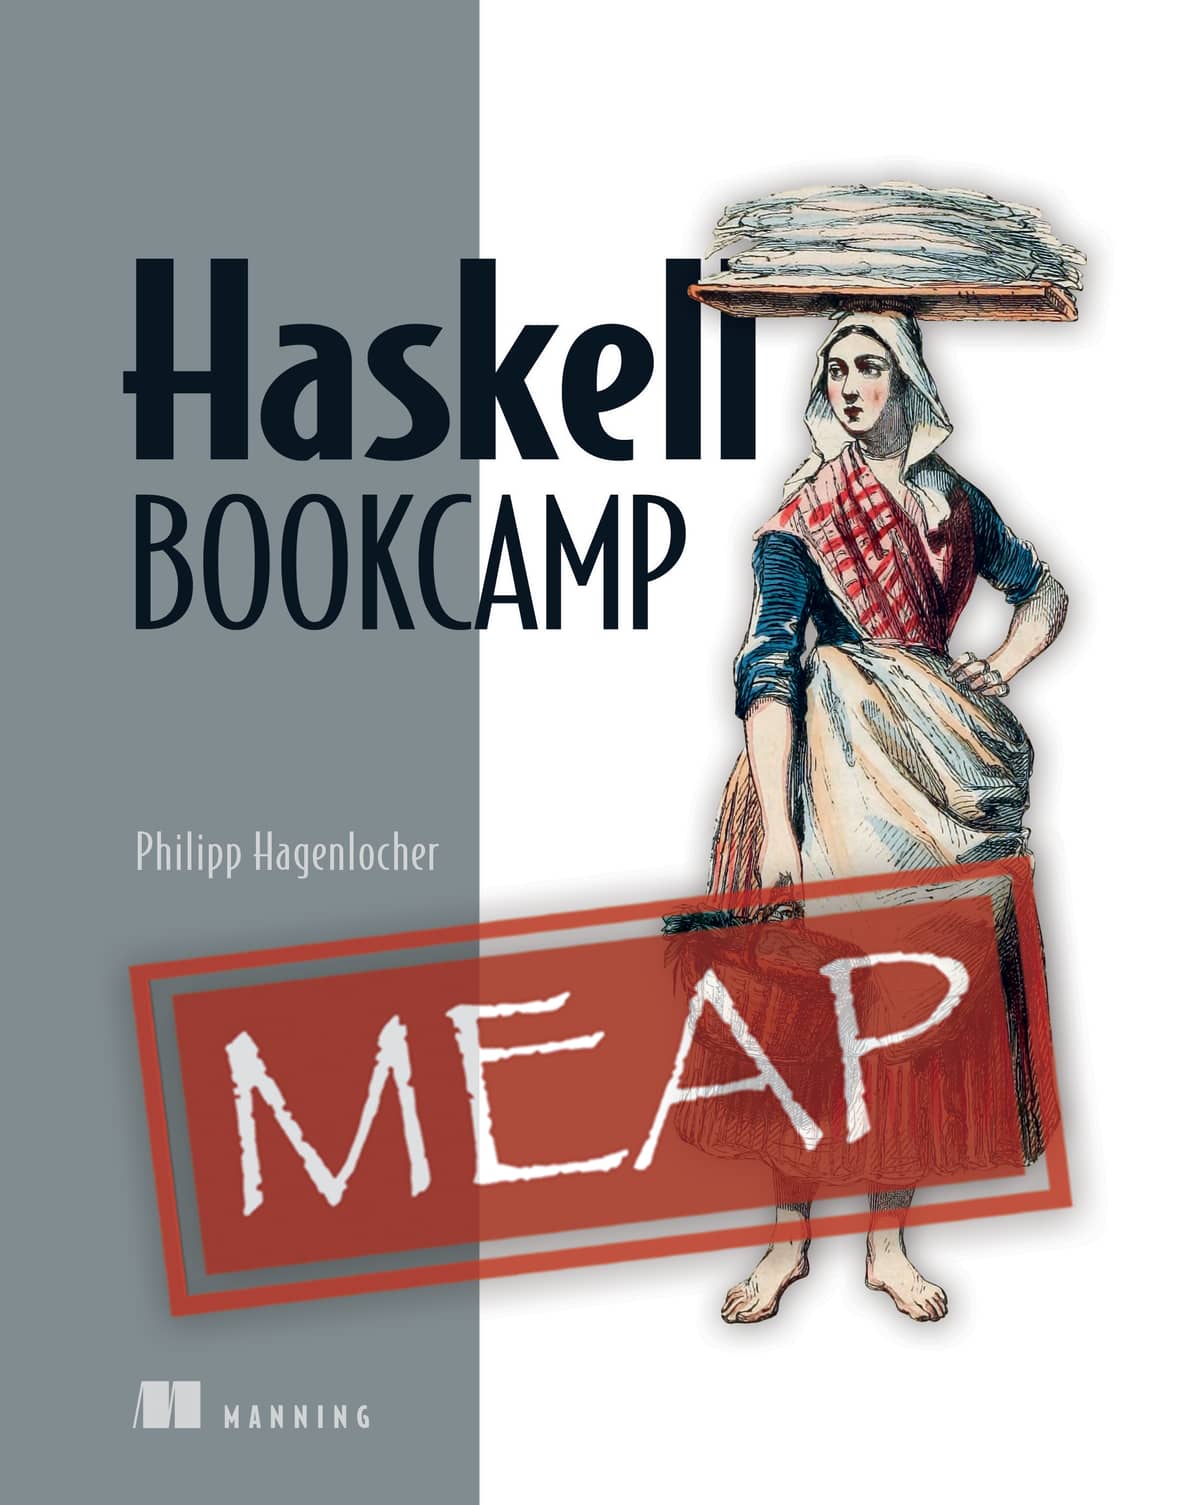 Haskell Bookcamp (Manning)